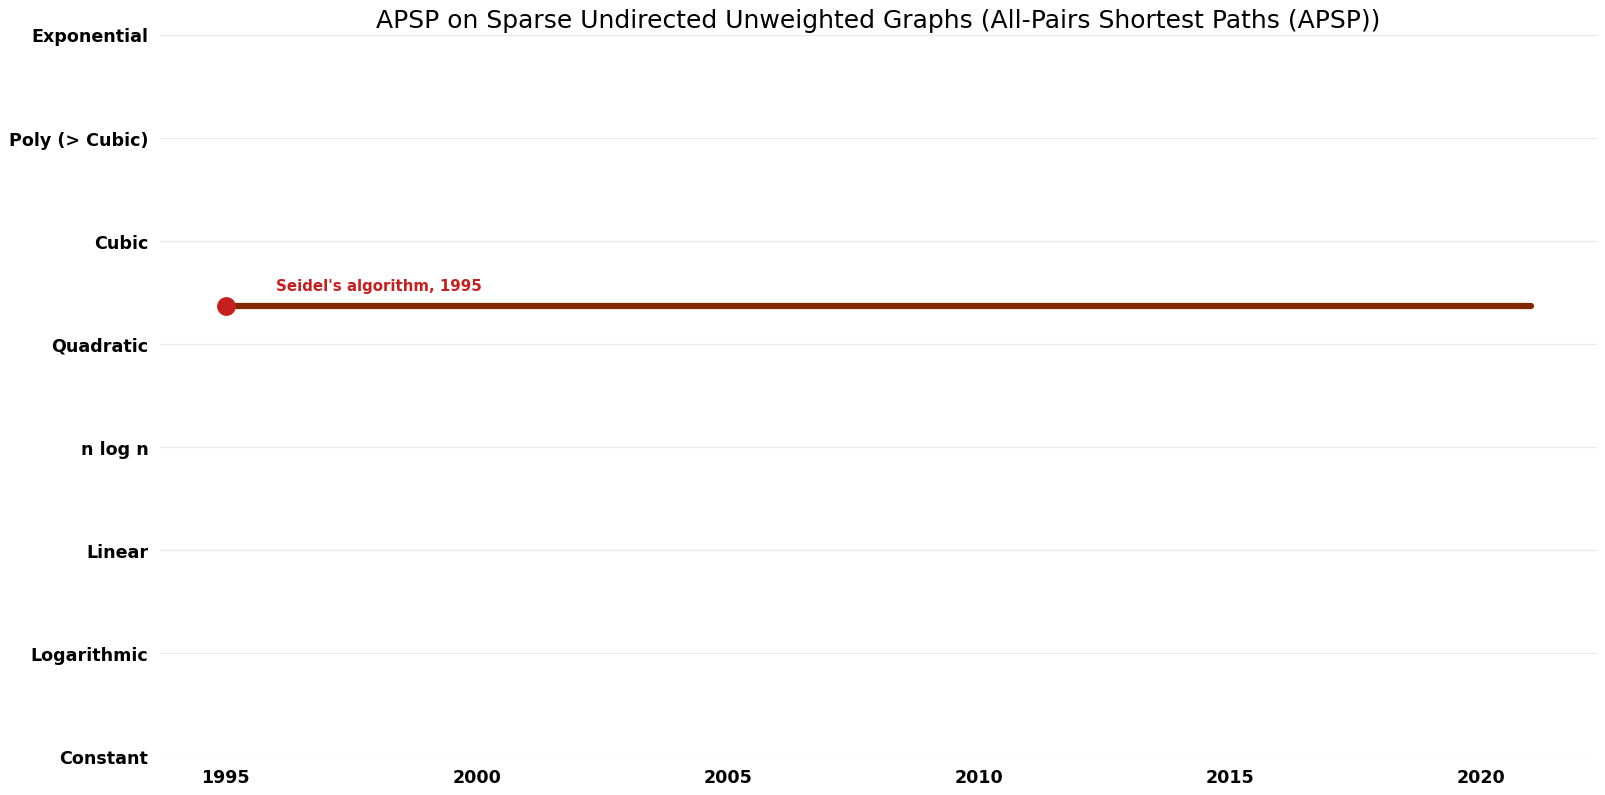 File:All-Pairs Shortest Paths (APSP) - APSP on Sparse Undirected Unweighted Graphs - Time.png